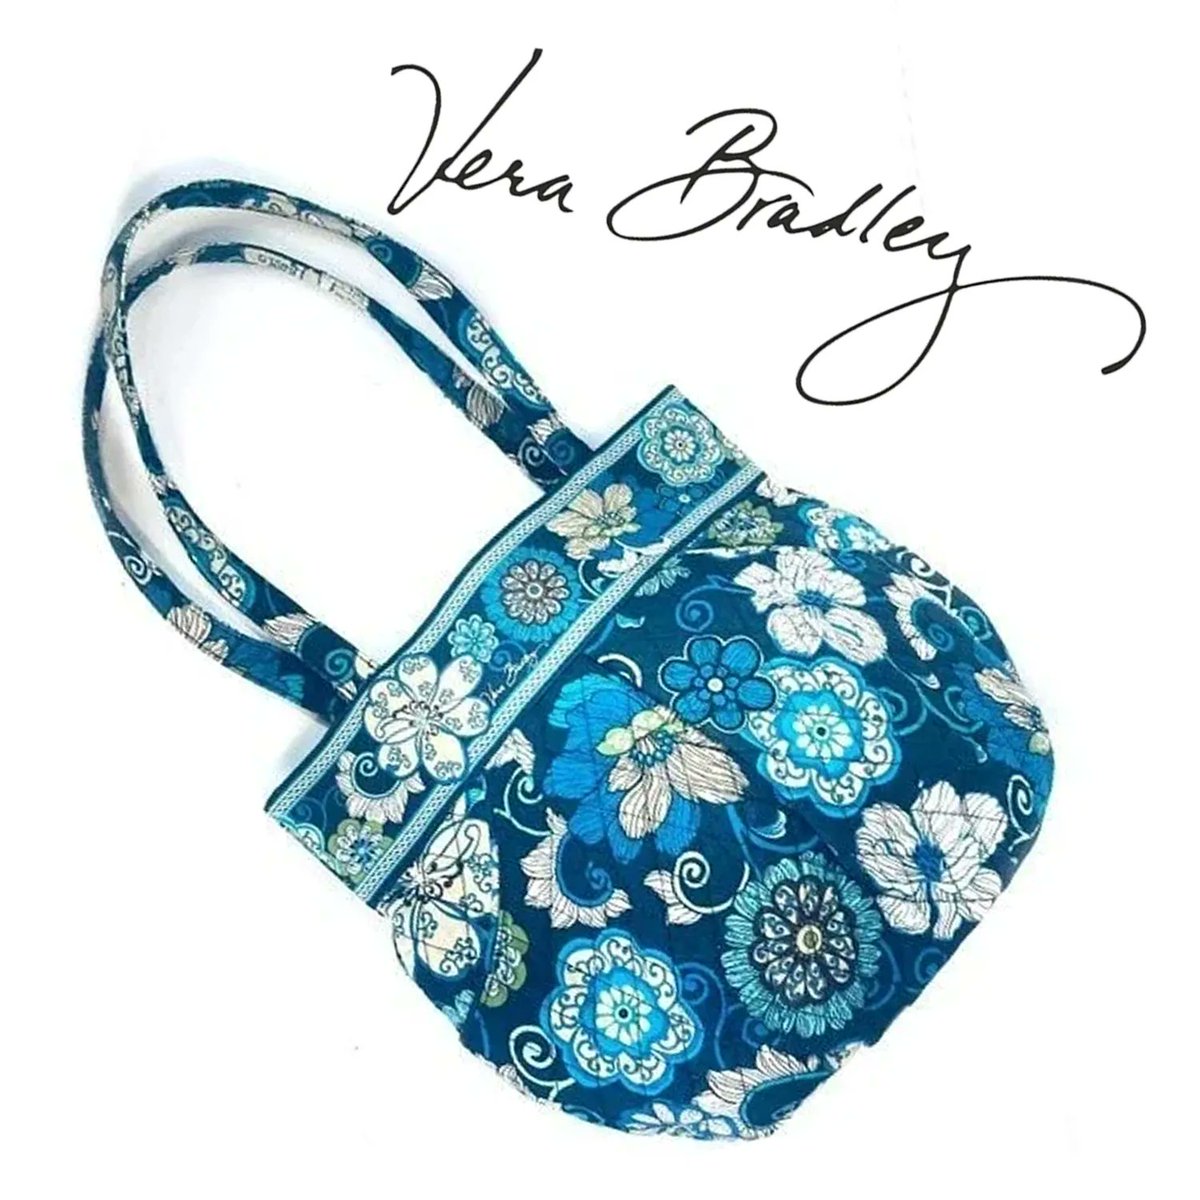 Vera Bradley MORGAN Tote in Retired MOD FLORAL Pattern 

buff.ly/43IRzxr 

#verabradley #totebag #quilted #tote #handbag #crossbodybag #cotton #modfloral #blue #woodcut #floral #floralvibes #ilovefloral #ilovequilting